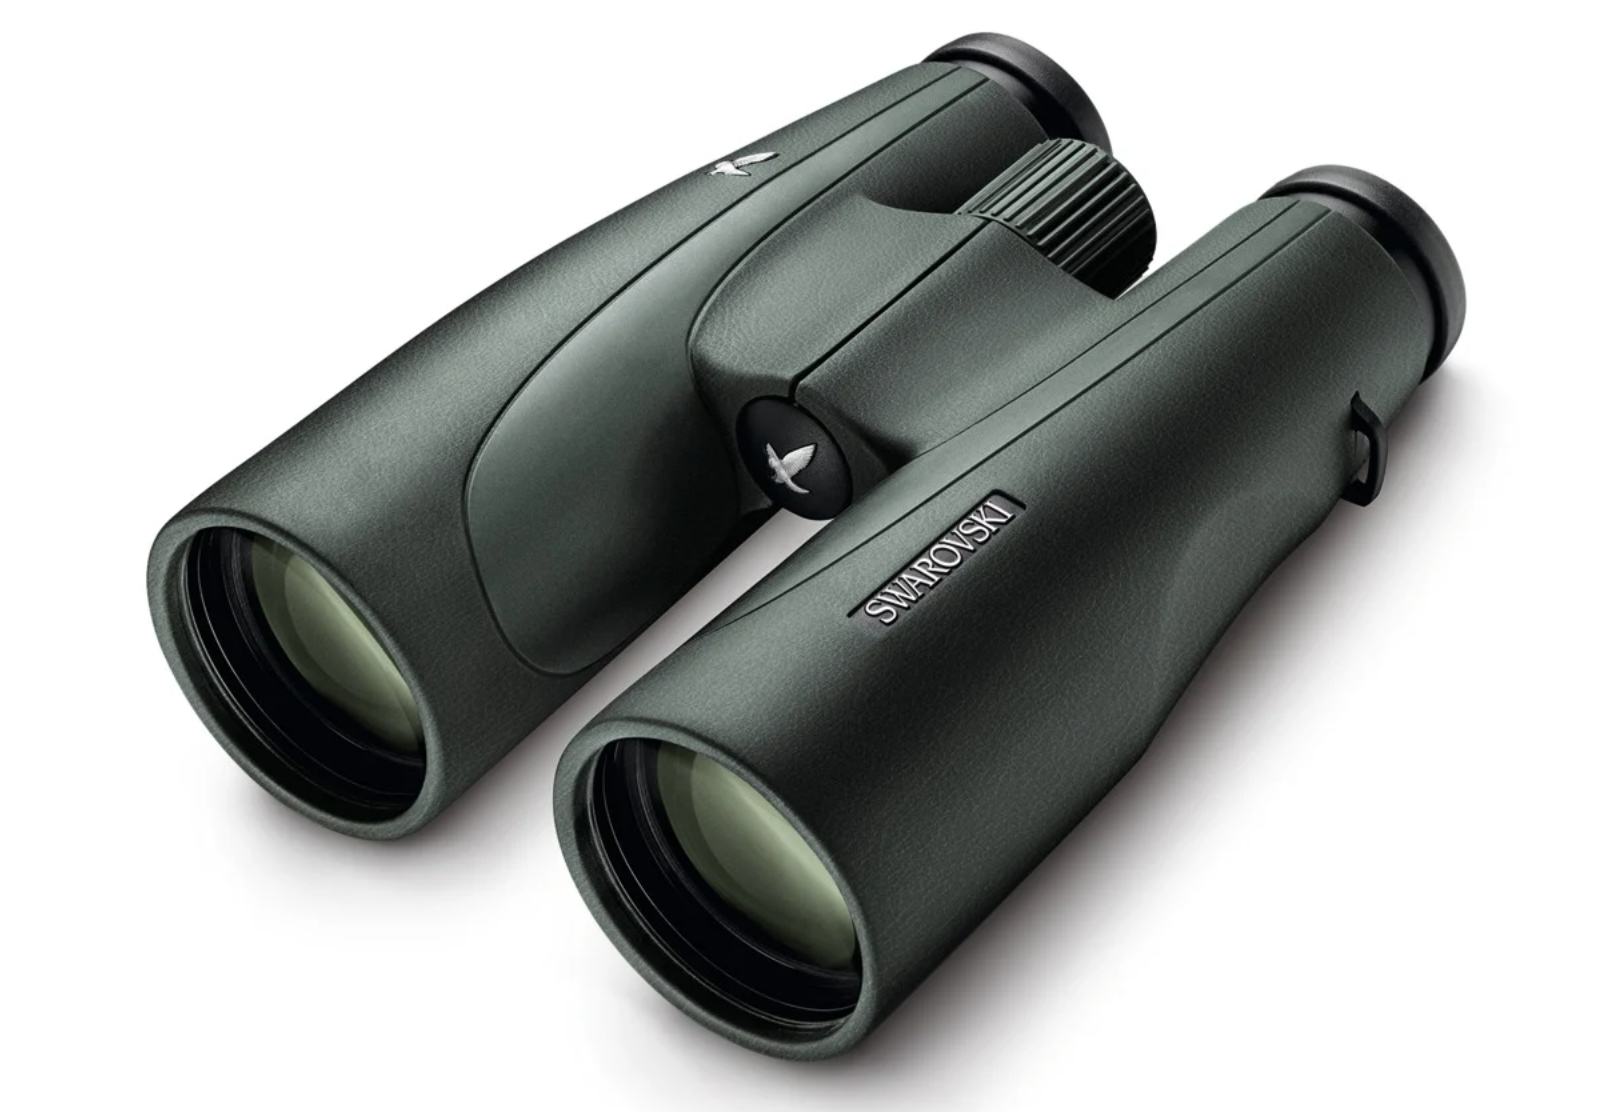 A pair of binoculars for hunting